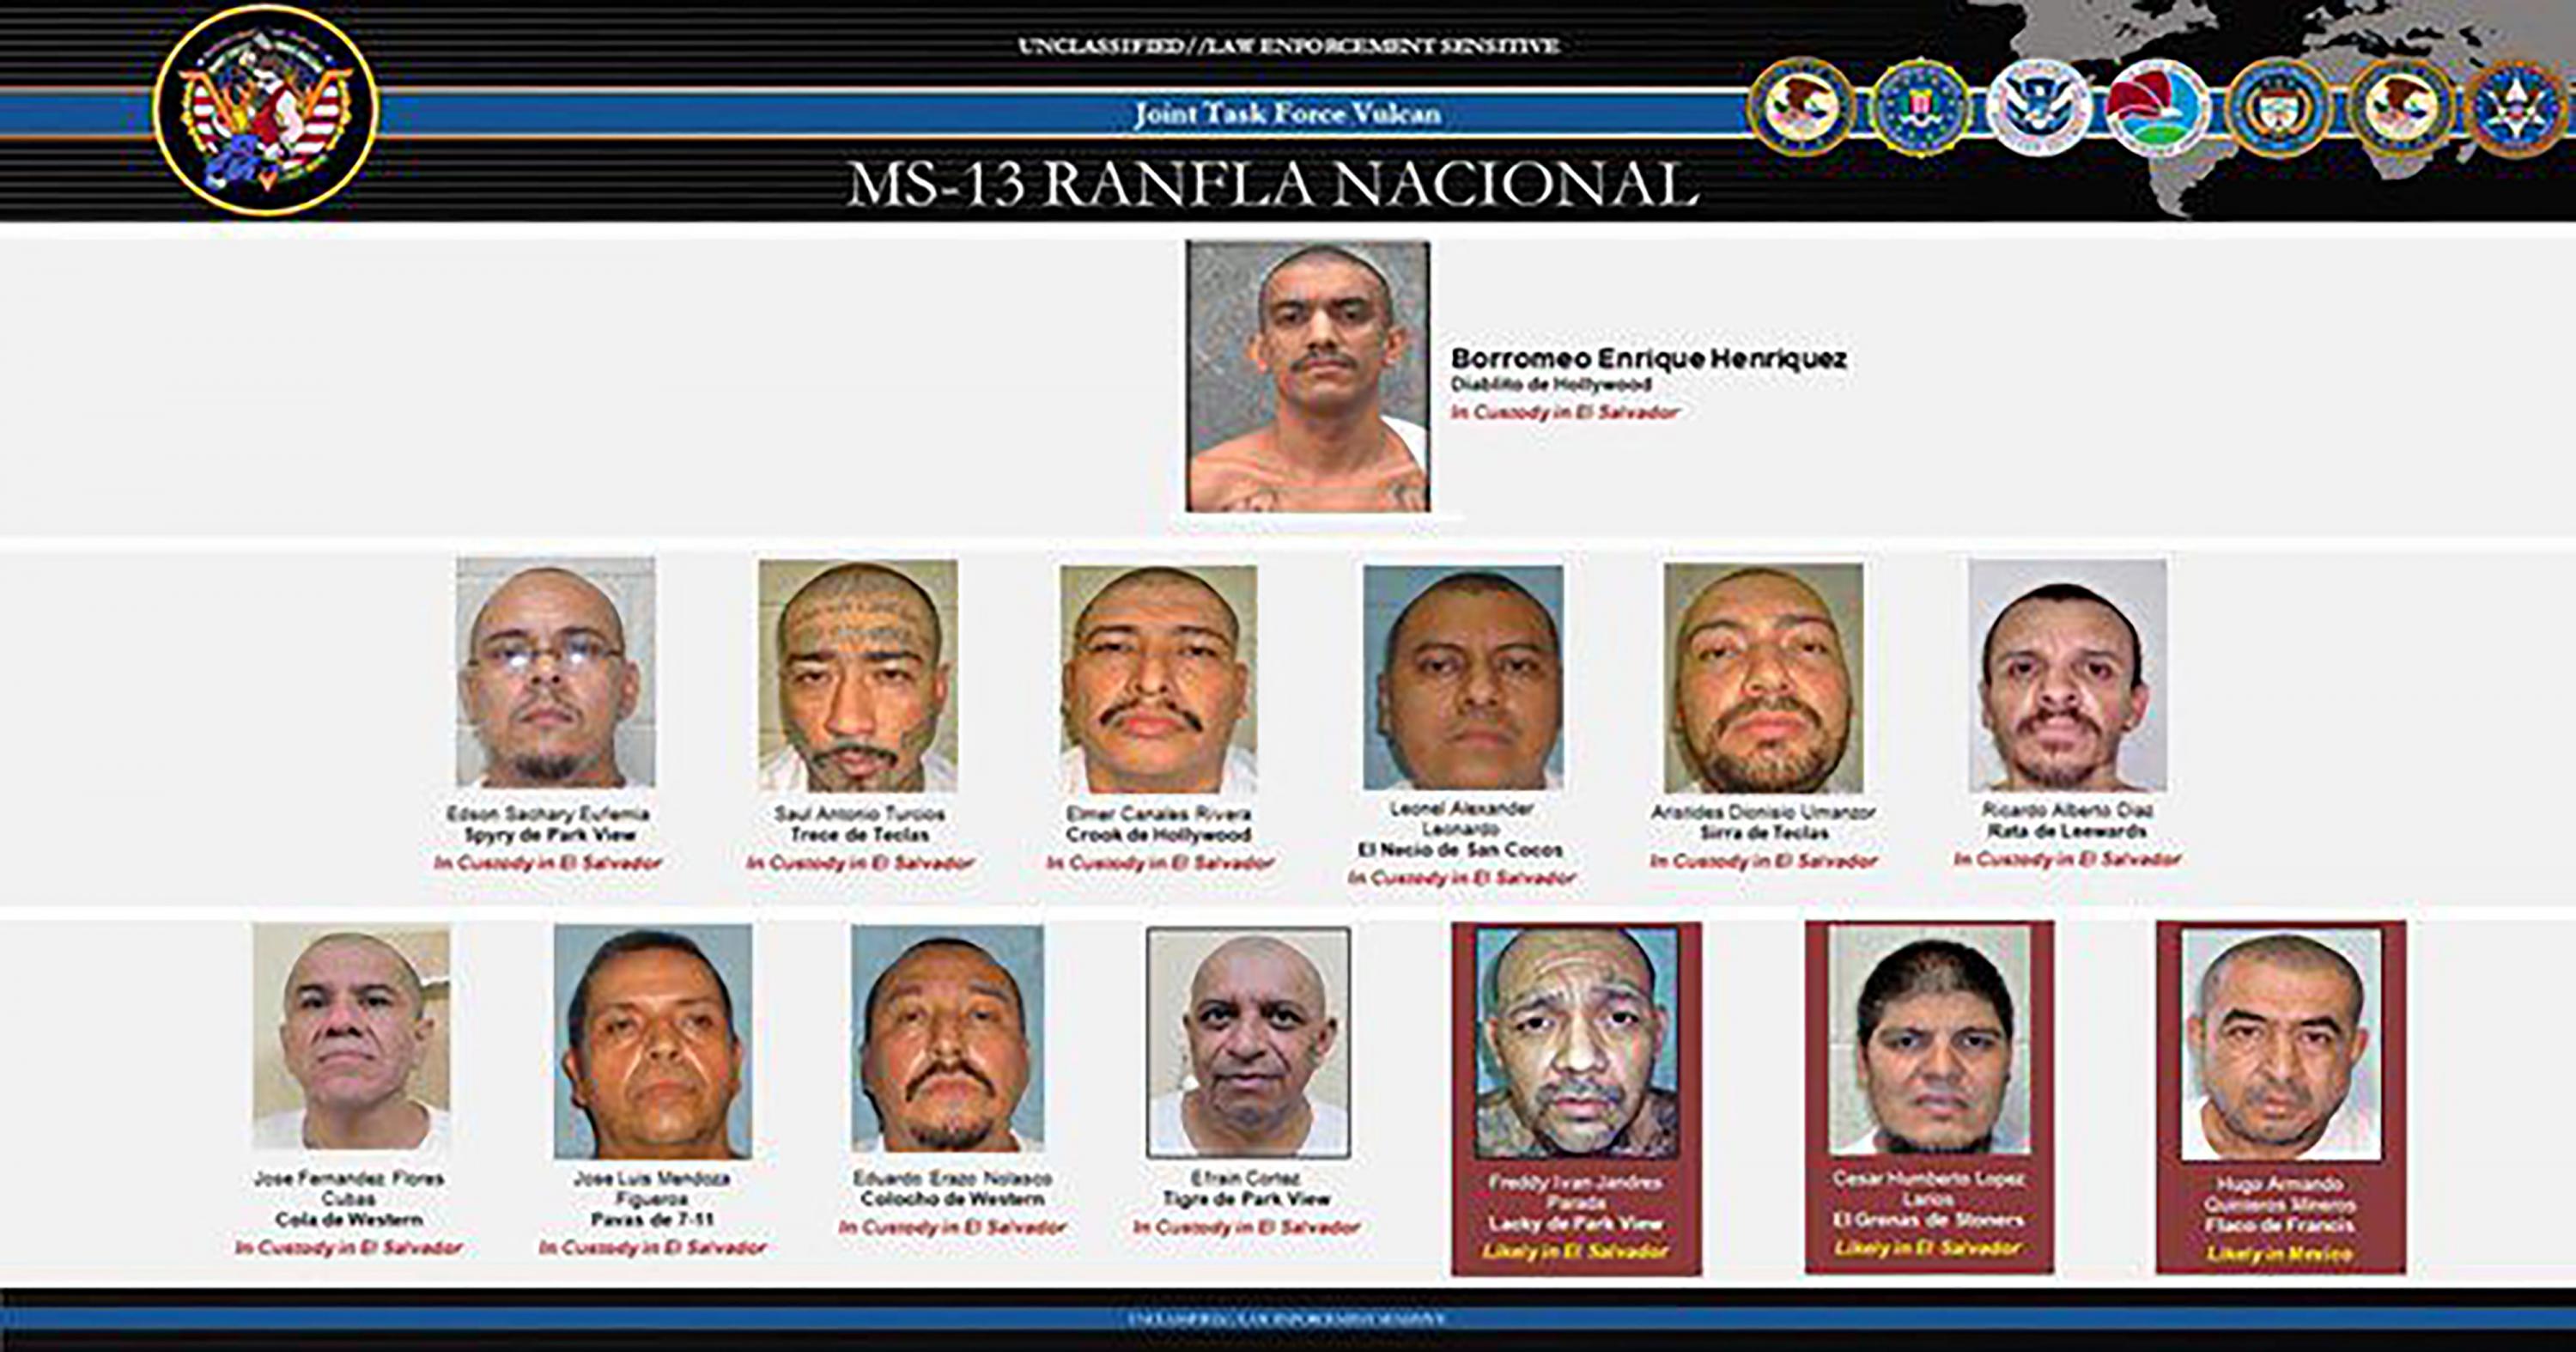 U.S. Department of Justice document profiling members of the MS-13 leadership structure, or Ranfla Nacional, currently under indictment in the Eastern District of New York.